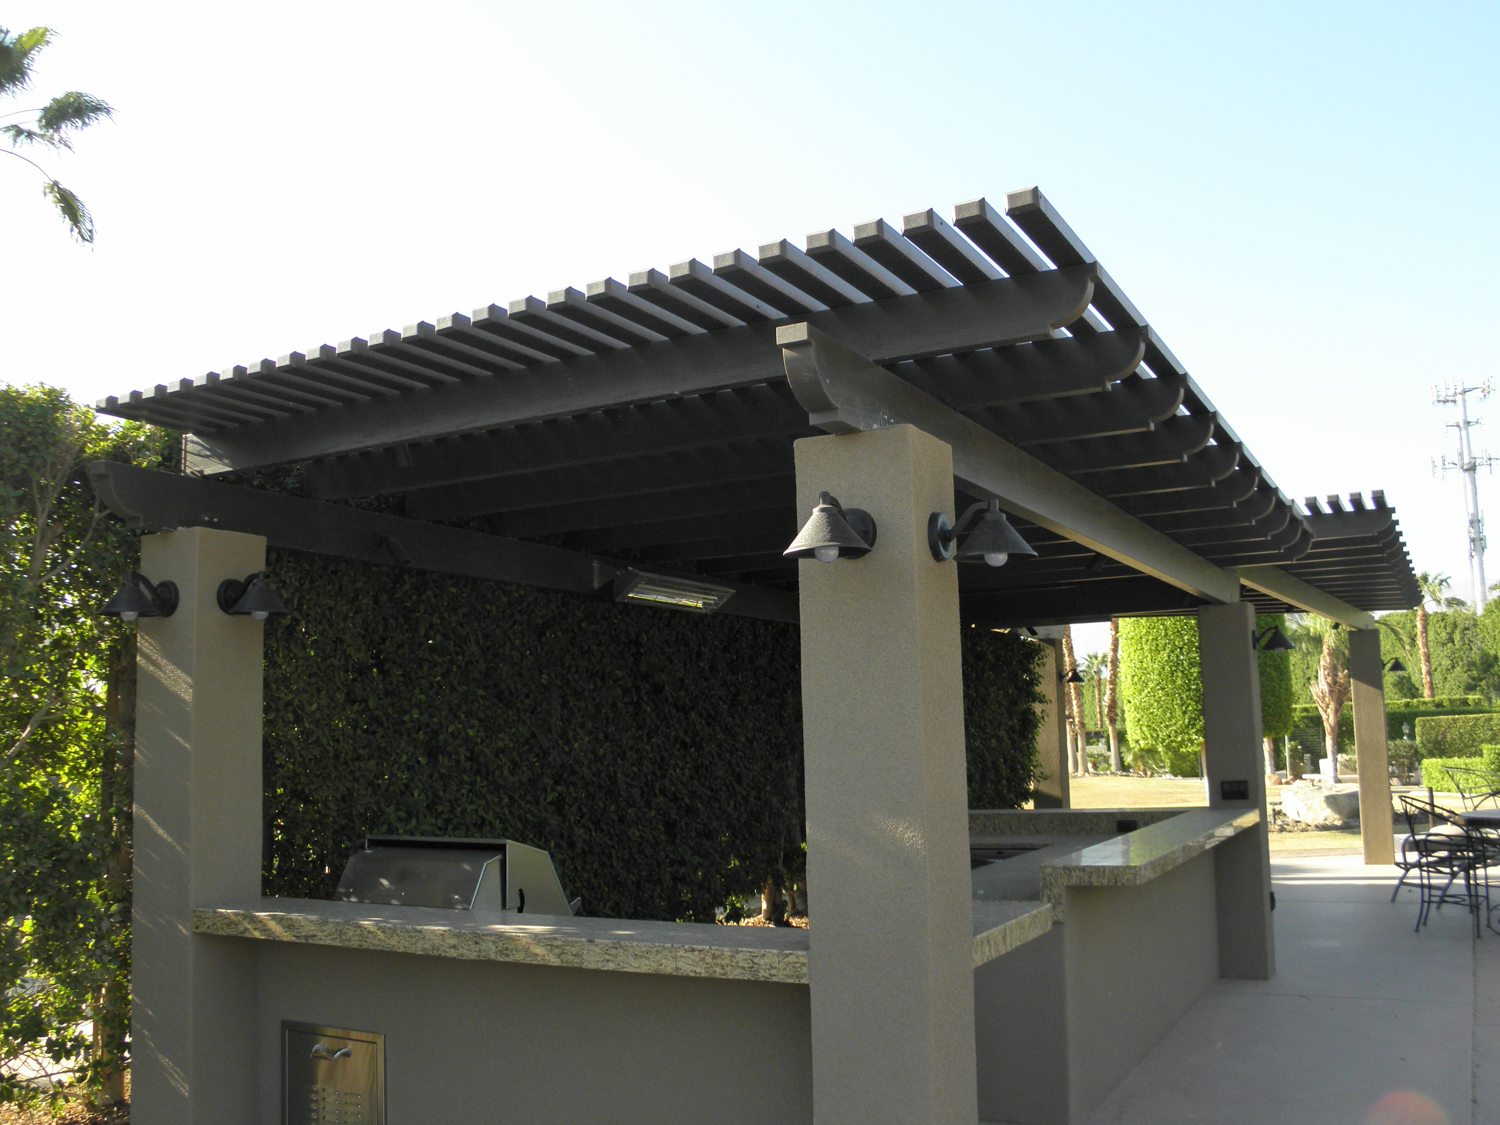 BBQ and Lattice Patio Cover, Indian Wells, CA 92210